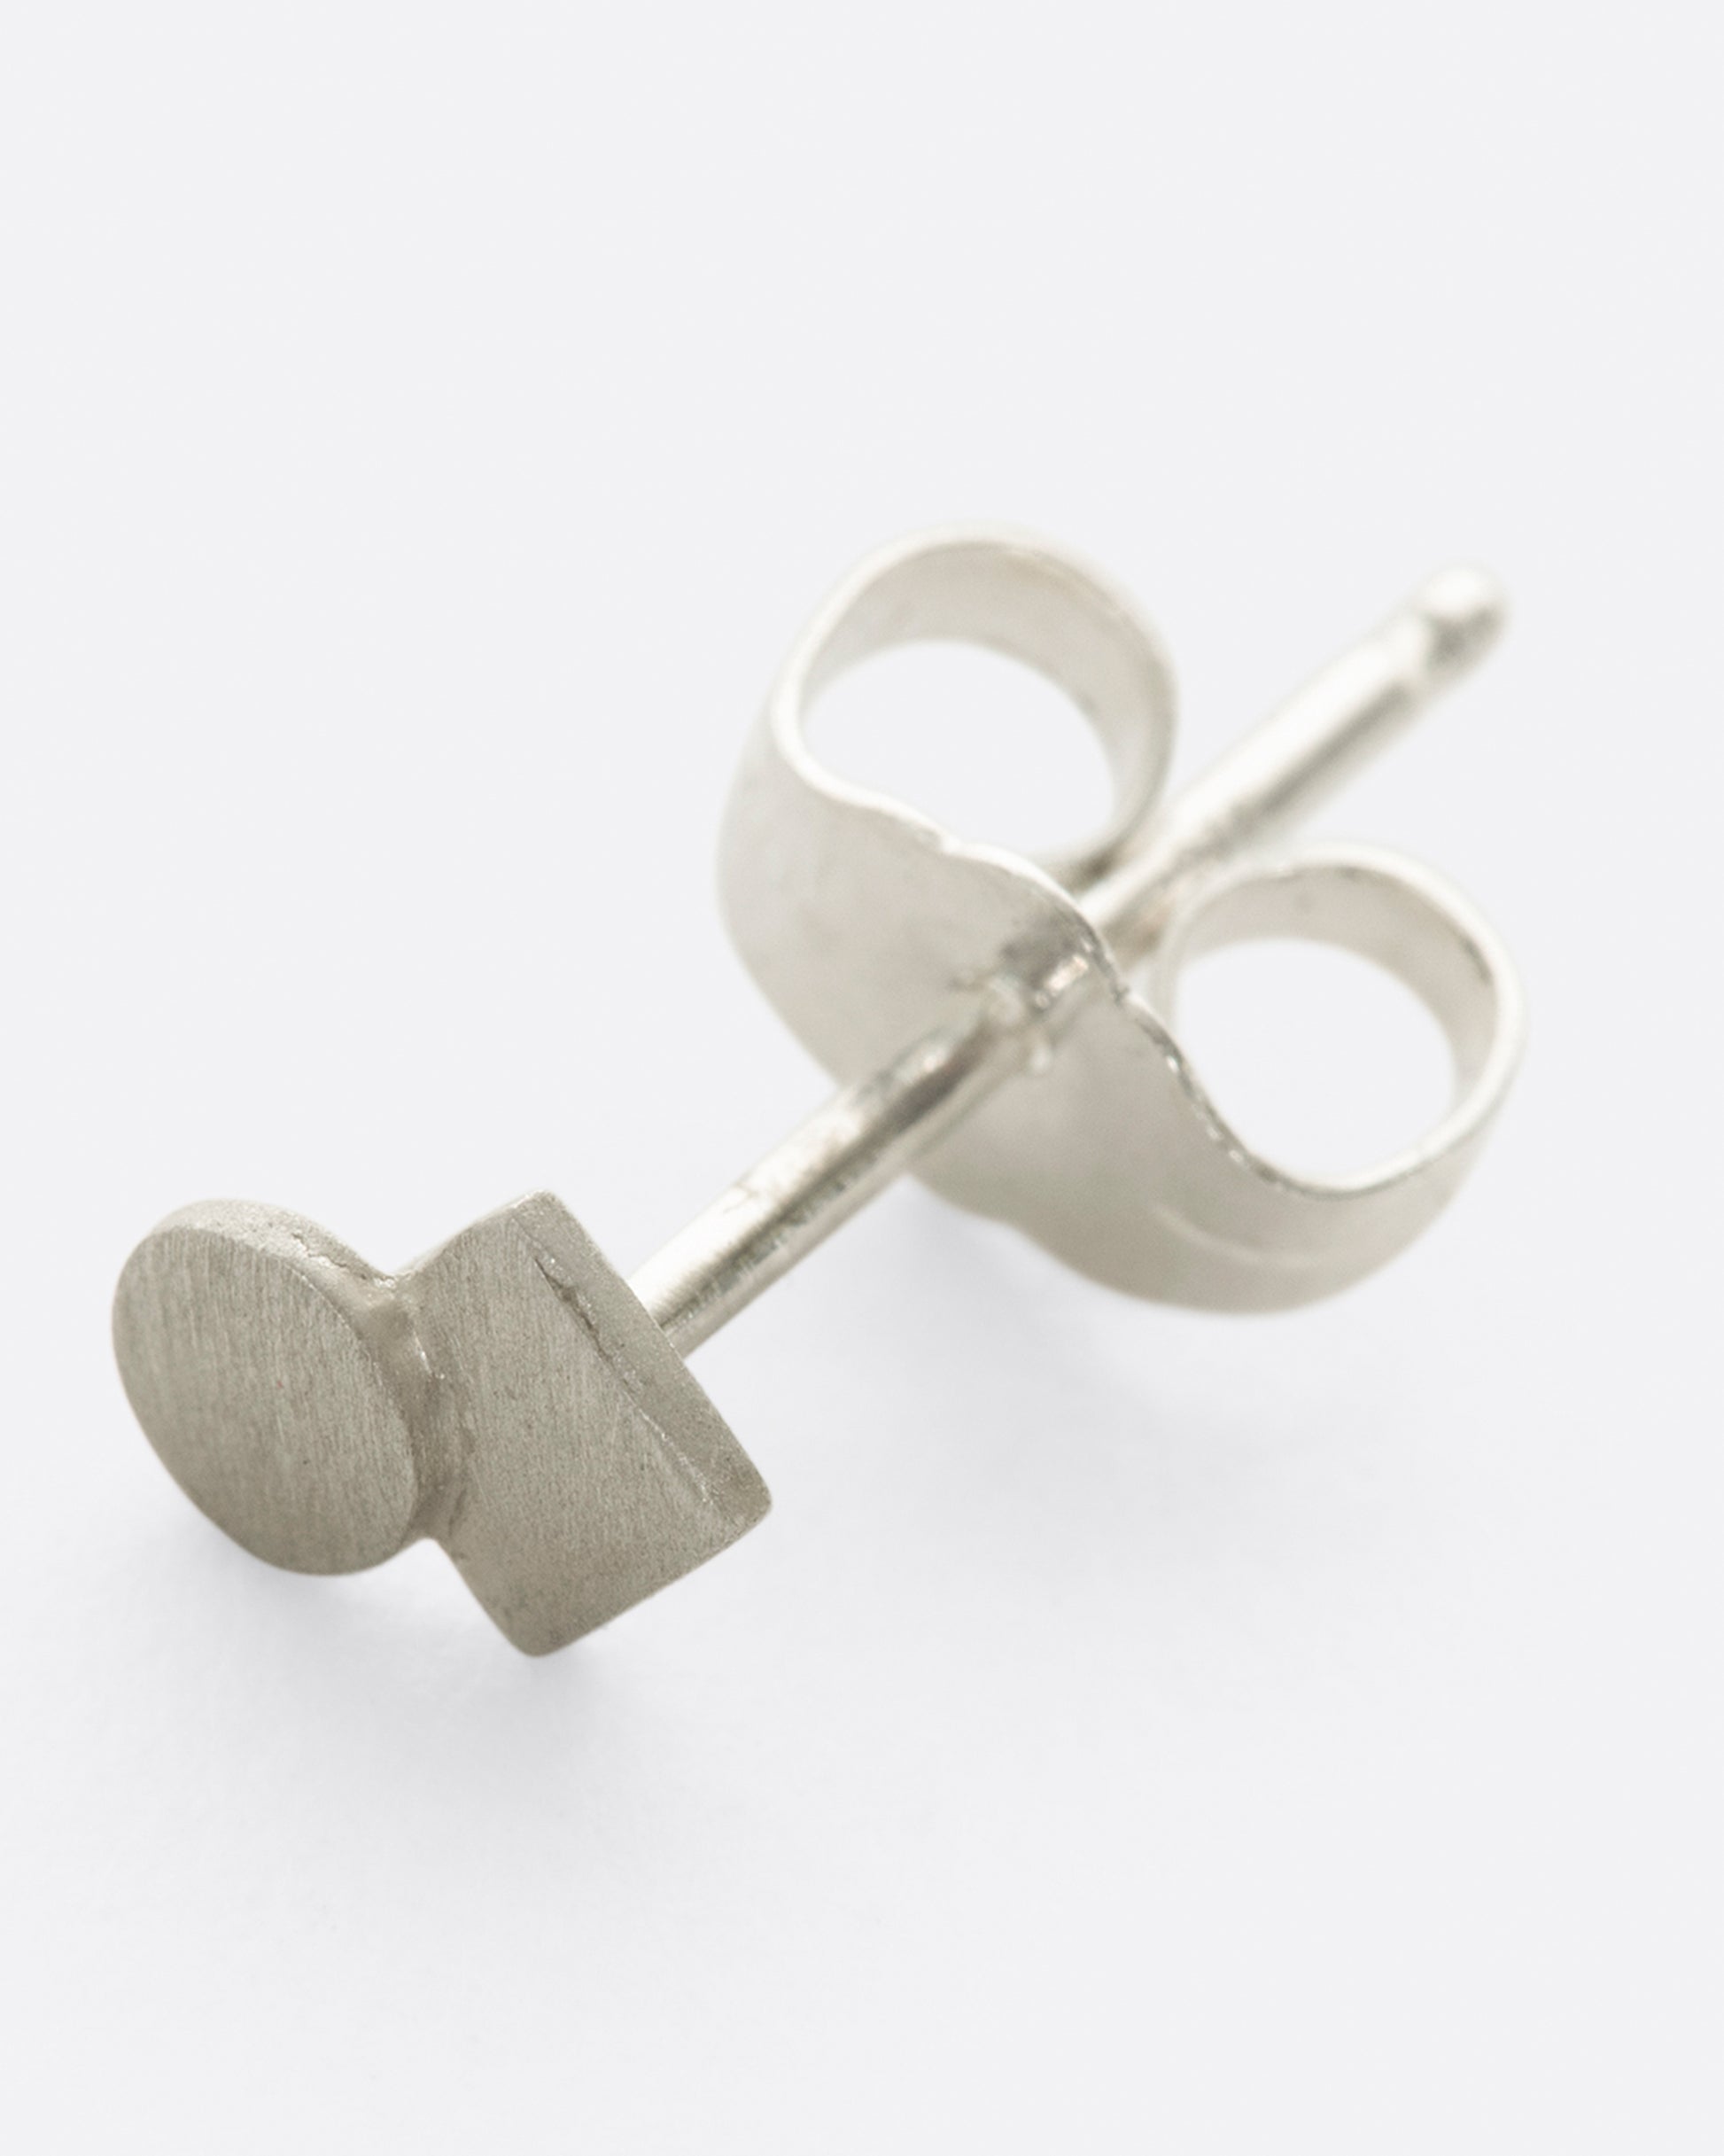 Sterling silver square stud earring with overlapping circle and matte finish.